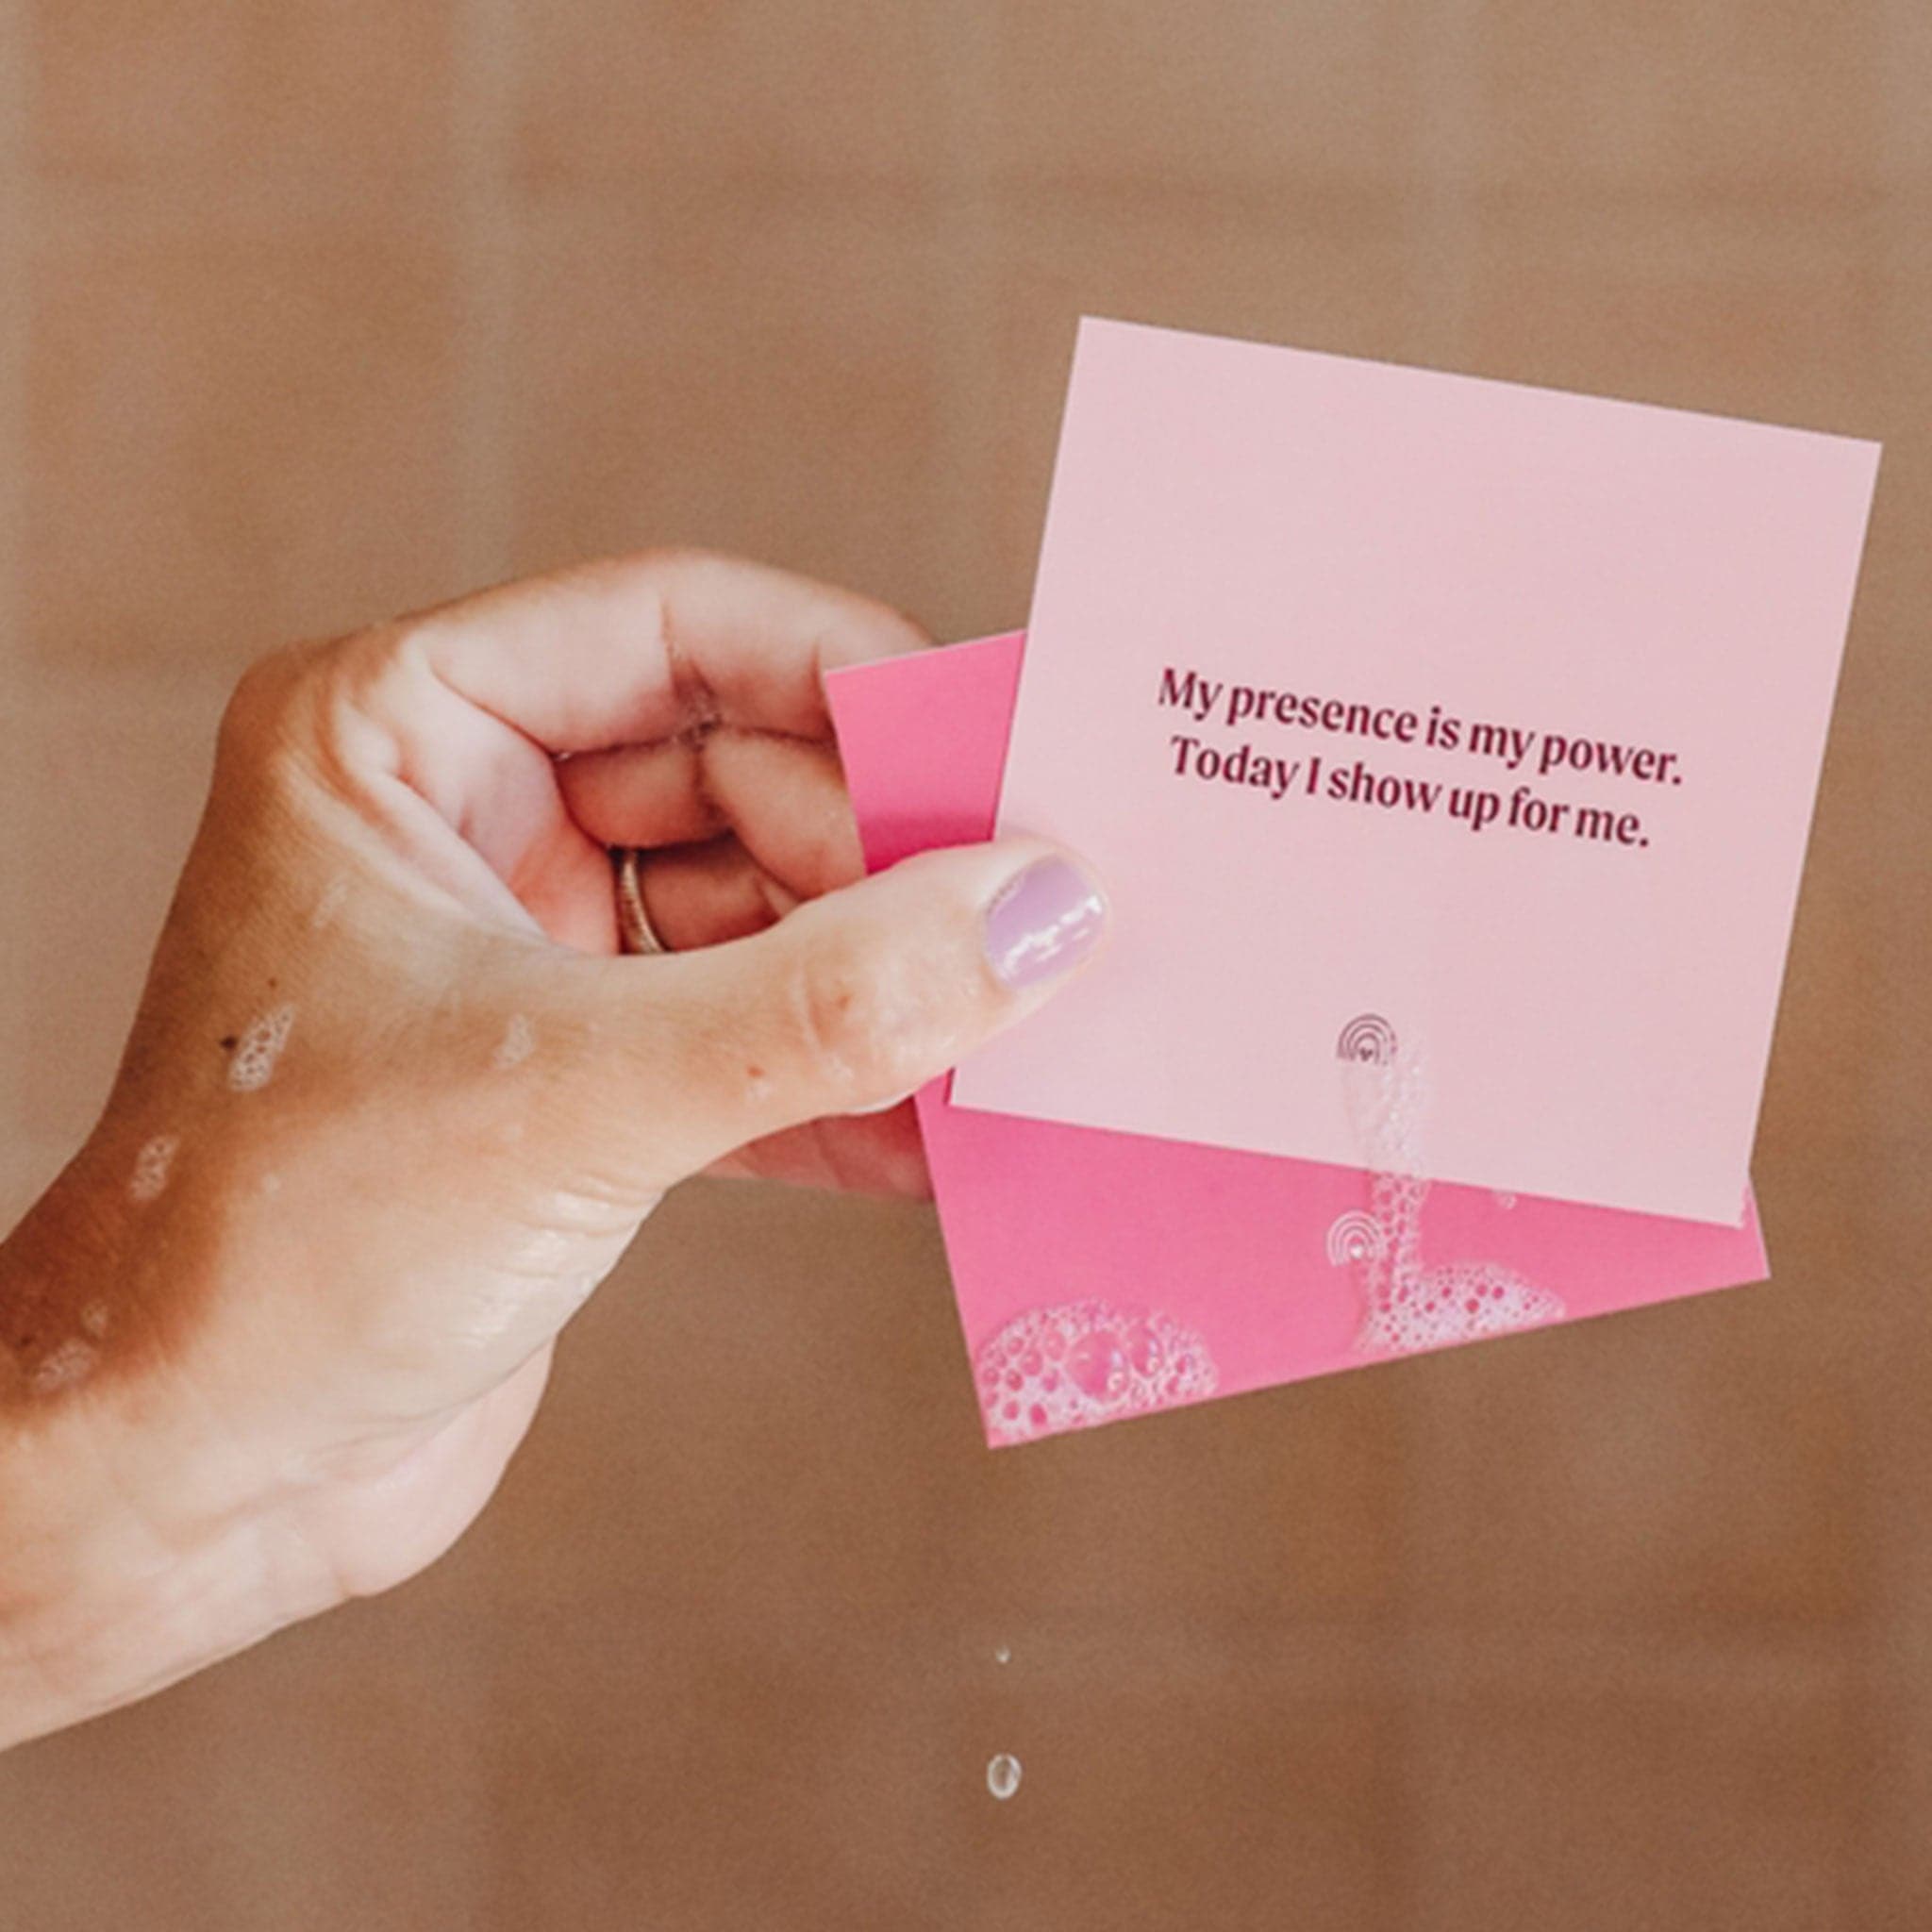 Different tones of pink cards that each have an uplifting affirmation on them for you to read and stick on the walls of your shower. This one pictured reads, "My presence is my power. Today I show up for me."